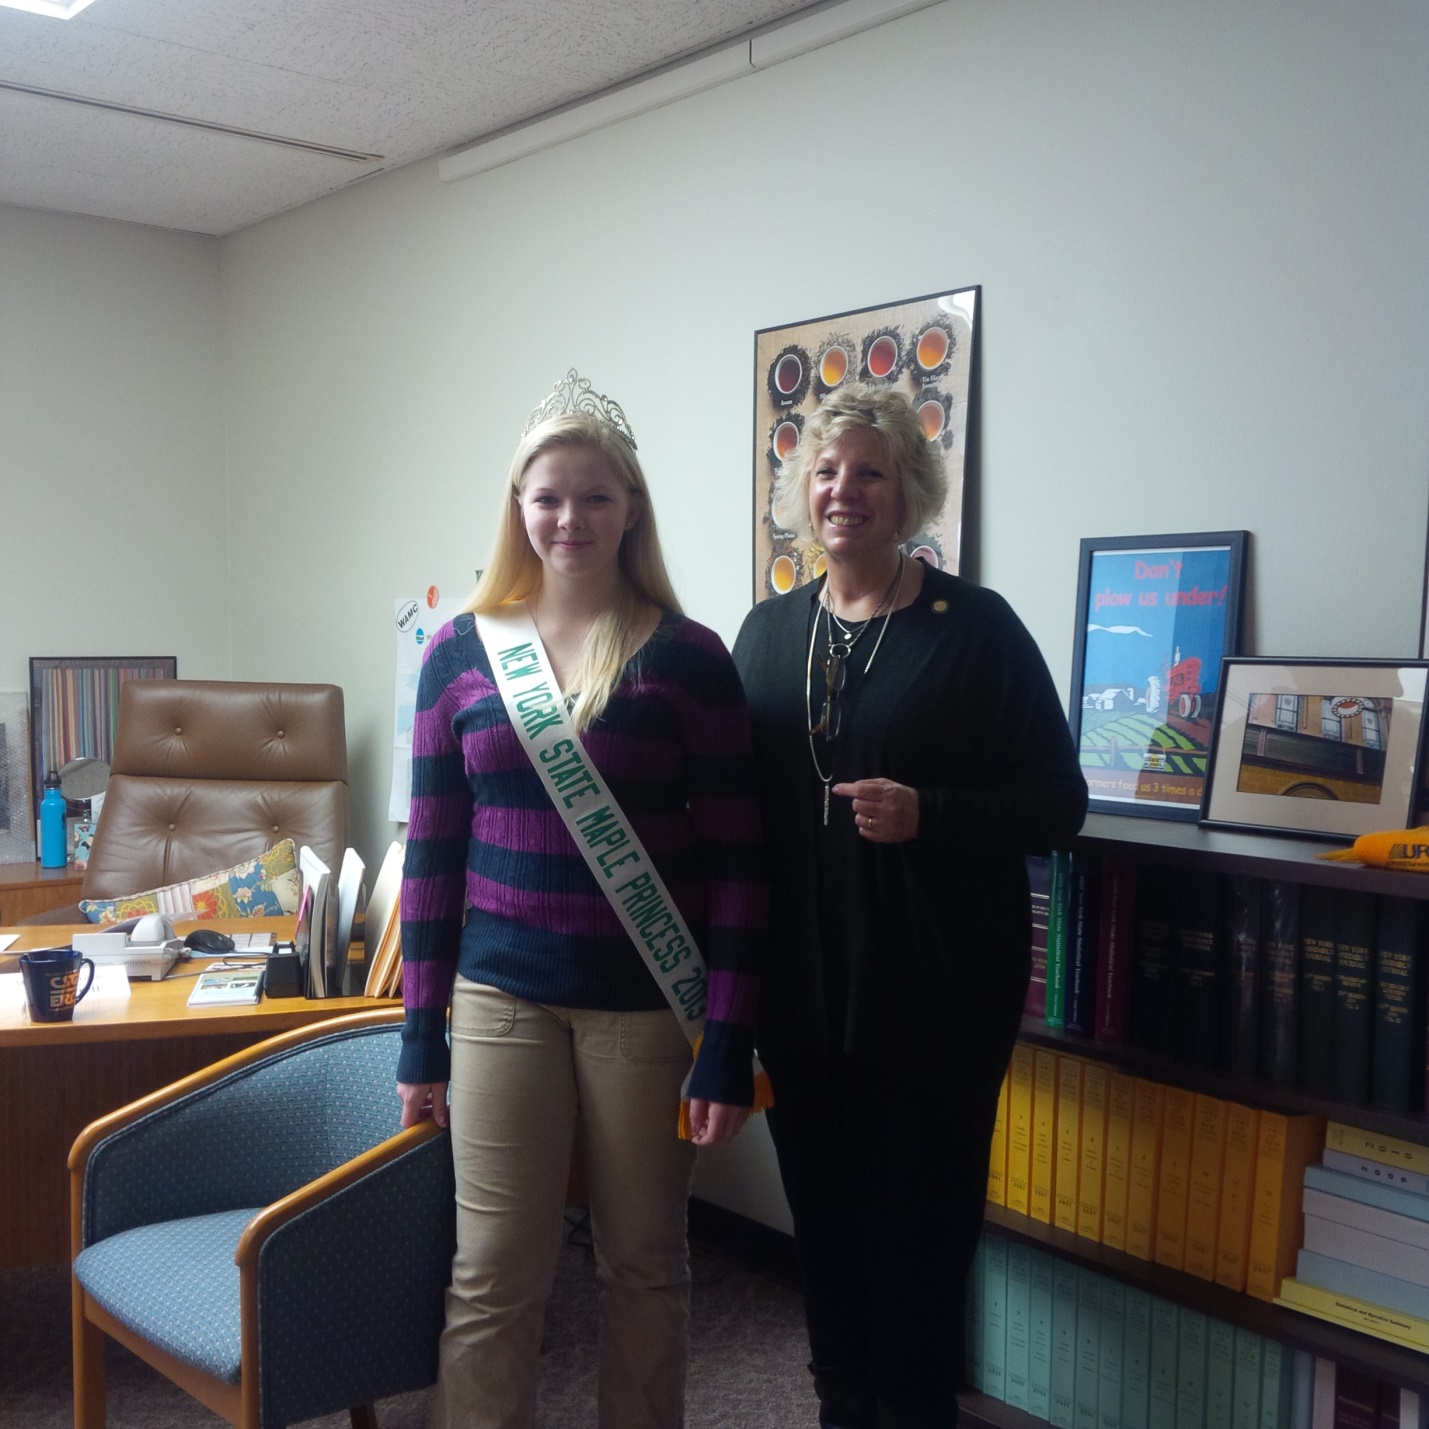 Pictured: Kylea McAdam, NY State Maple Princess visited with Assemblymember Didi Barrett.